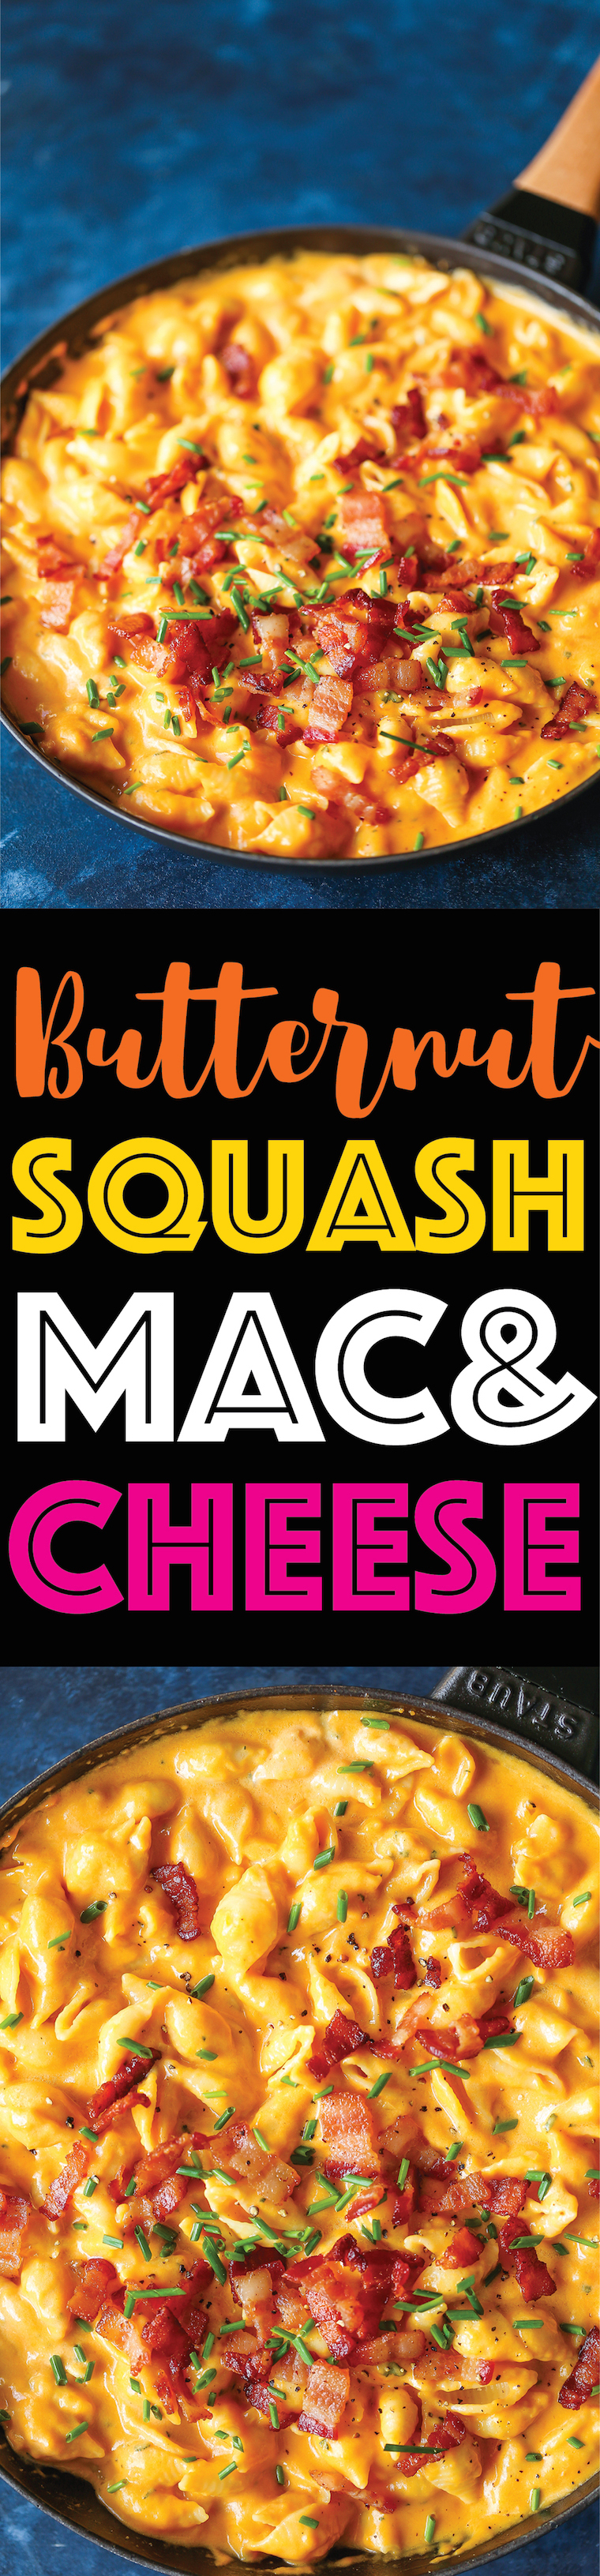 Butternut Squash Mac and Cheese - Mac and cheese at it's finest! So creamy, so rich + so amazing yet it's so much healthier than traditional mac and cheese!